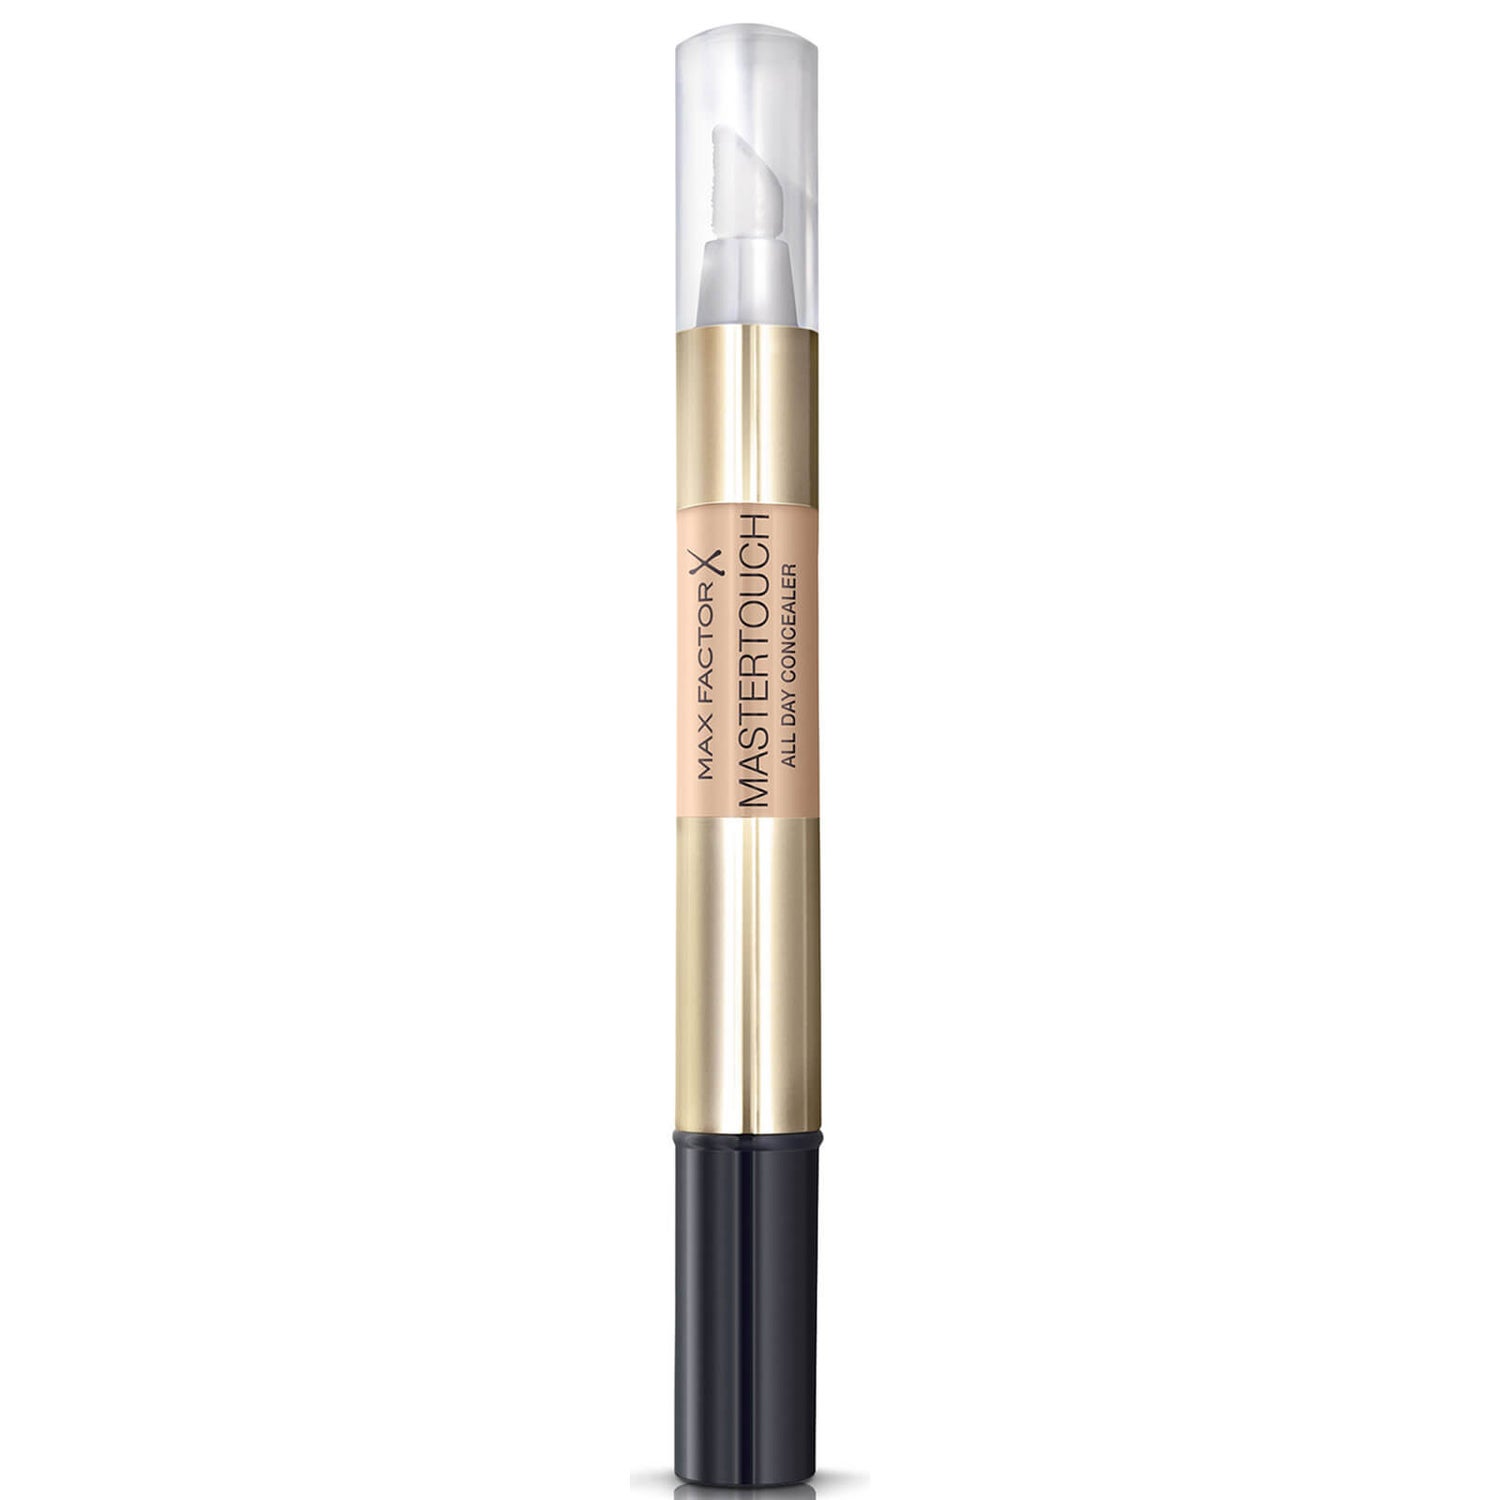 Max Factor Mastertouch All Day Concealer Pen - 303 Ivory